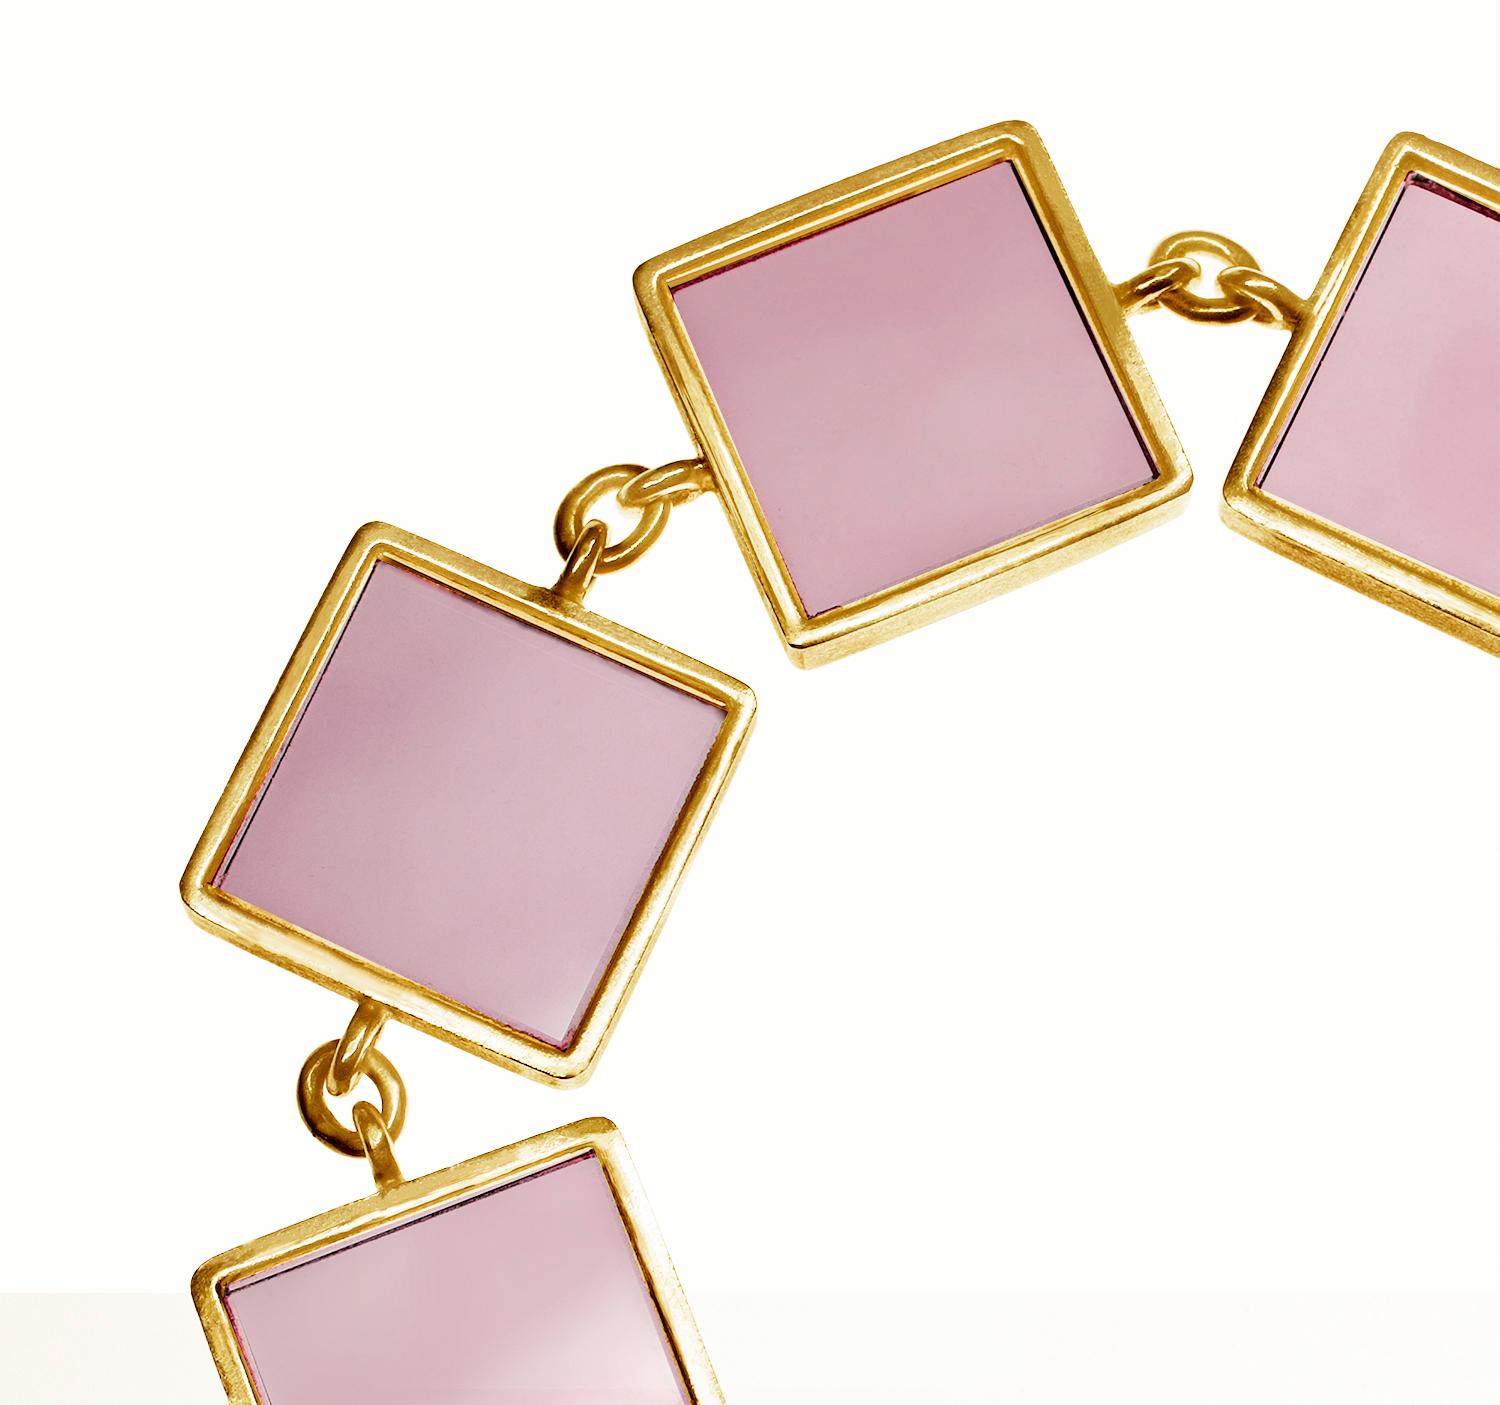 This designer jewelry bracelet features seven natural rose onyx gems set in 14 karat yellow gold. The Ink collection, designed by oil painter and jewelry designer Polya Medvedeva, was featured in Harper's Bazaar UA and Vogue UA.

The unique cut of